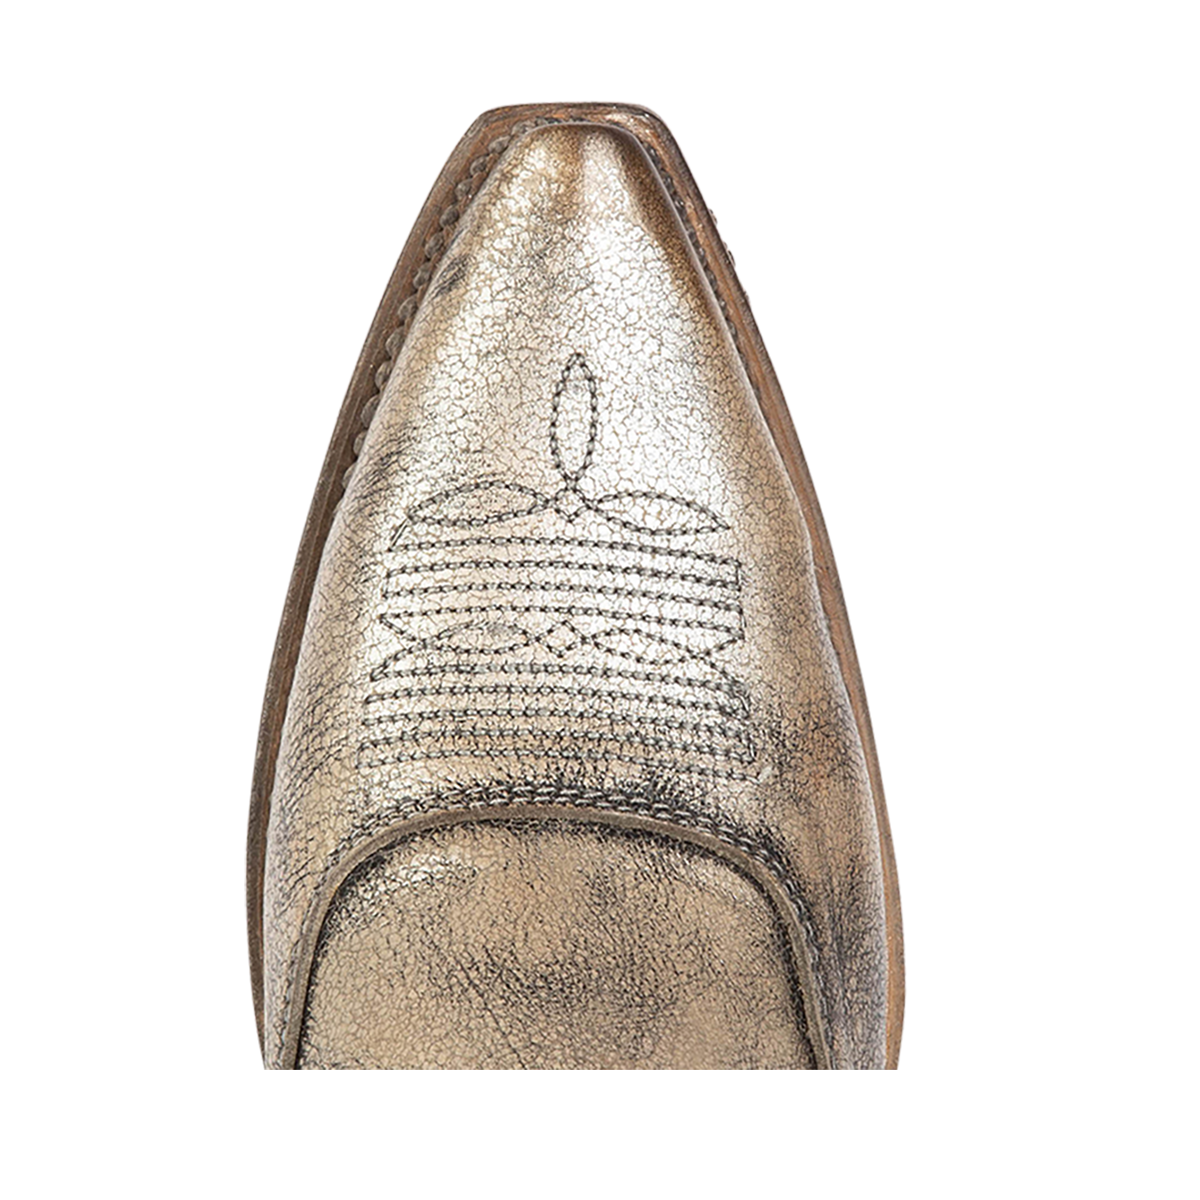 Top view showing snip toe and western stitch detailing on FREEBIRD women's Wyoming beige western shoe